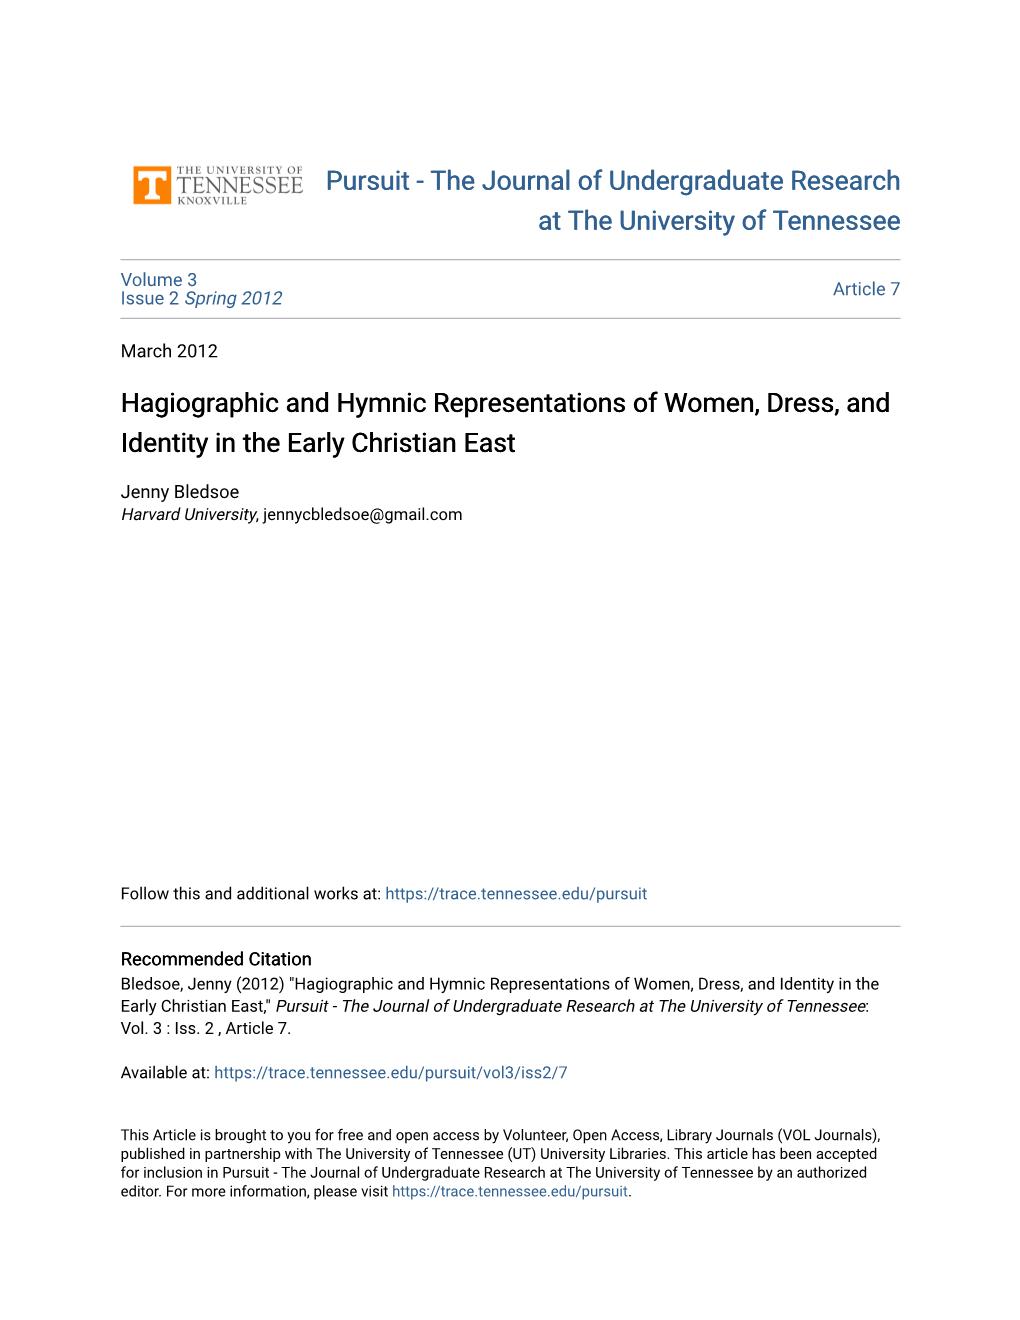 Hagiographic and Hymnic Representations of Women, Dress, and Identity in the Early Christian East